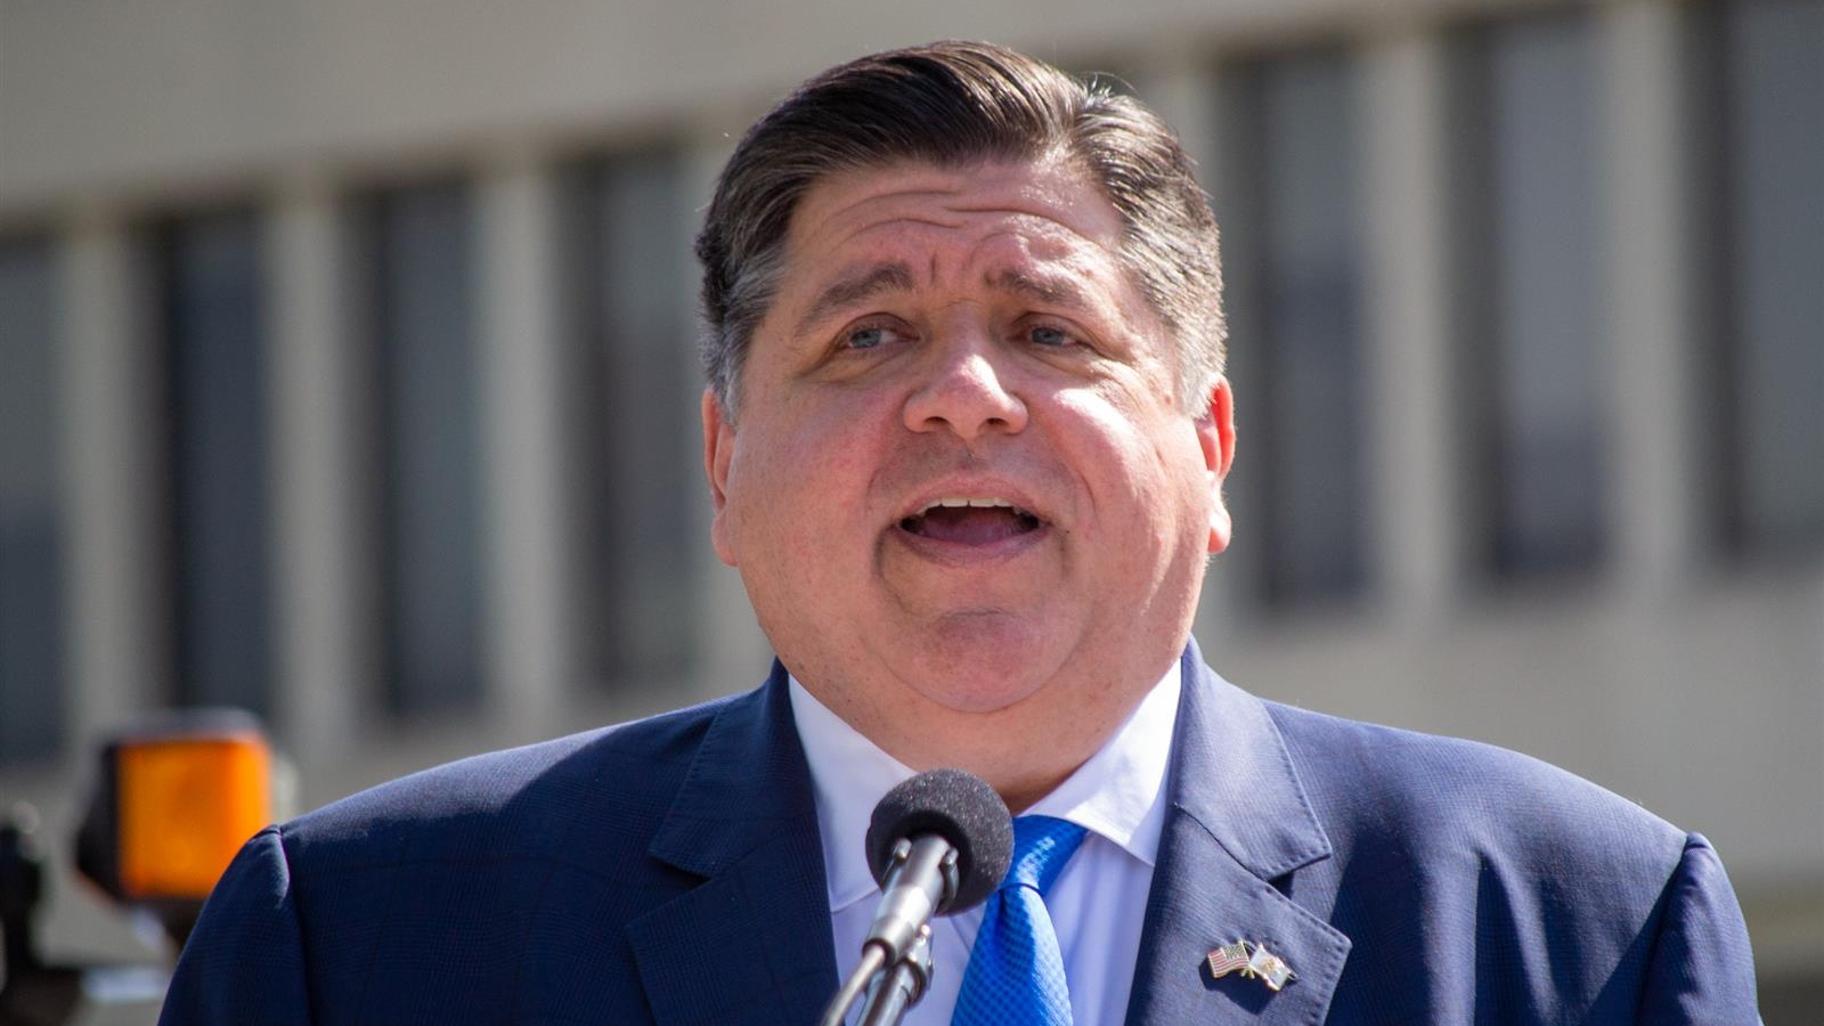 Gov. J.B. Pritzker speaks at a news conference in Springfield Friday. (Jerry Nowicki / Capitol News Illinois)